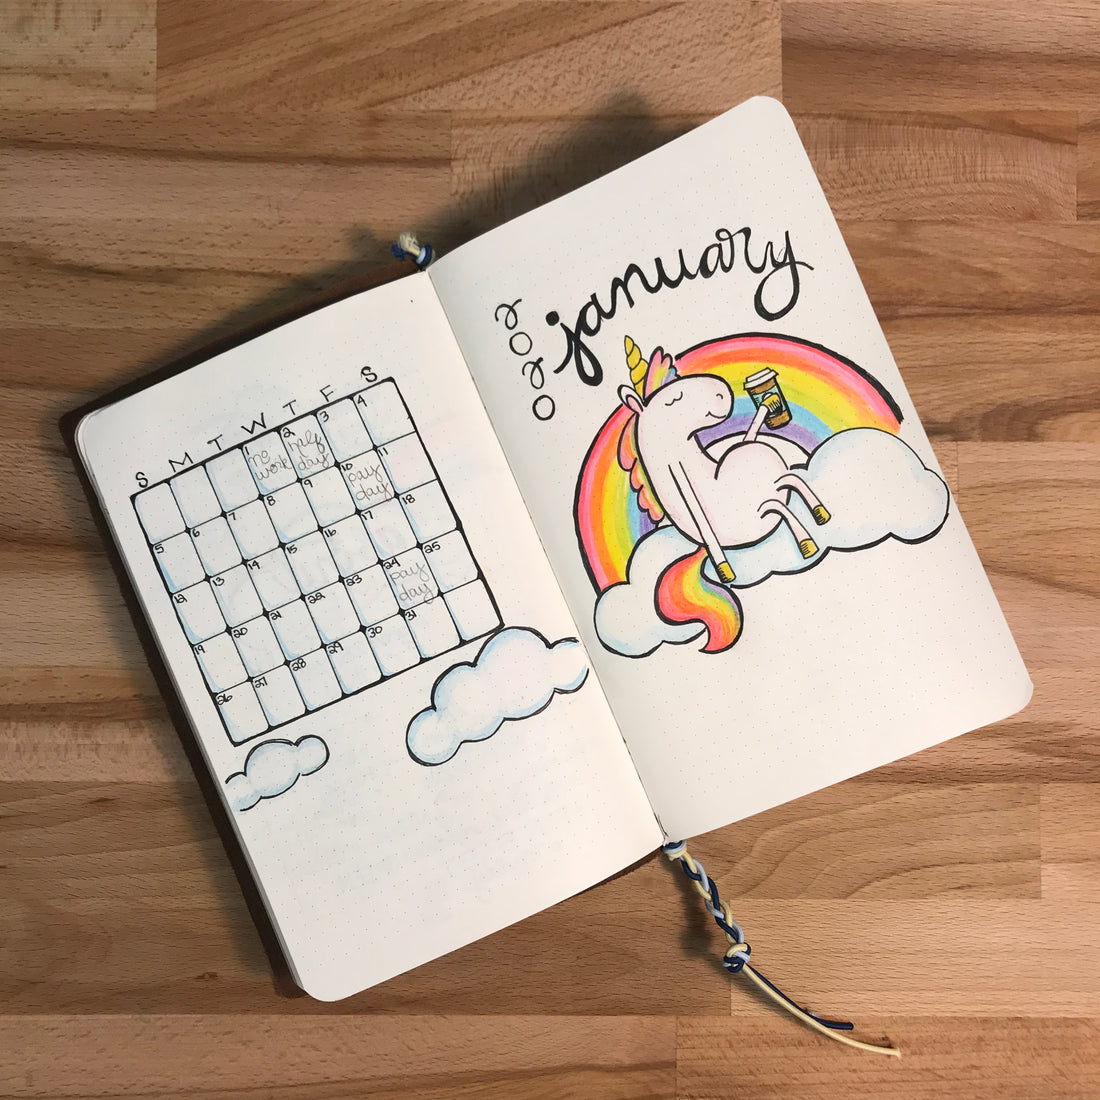 Journal Prompt for January 30th, 2020